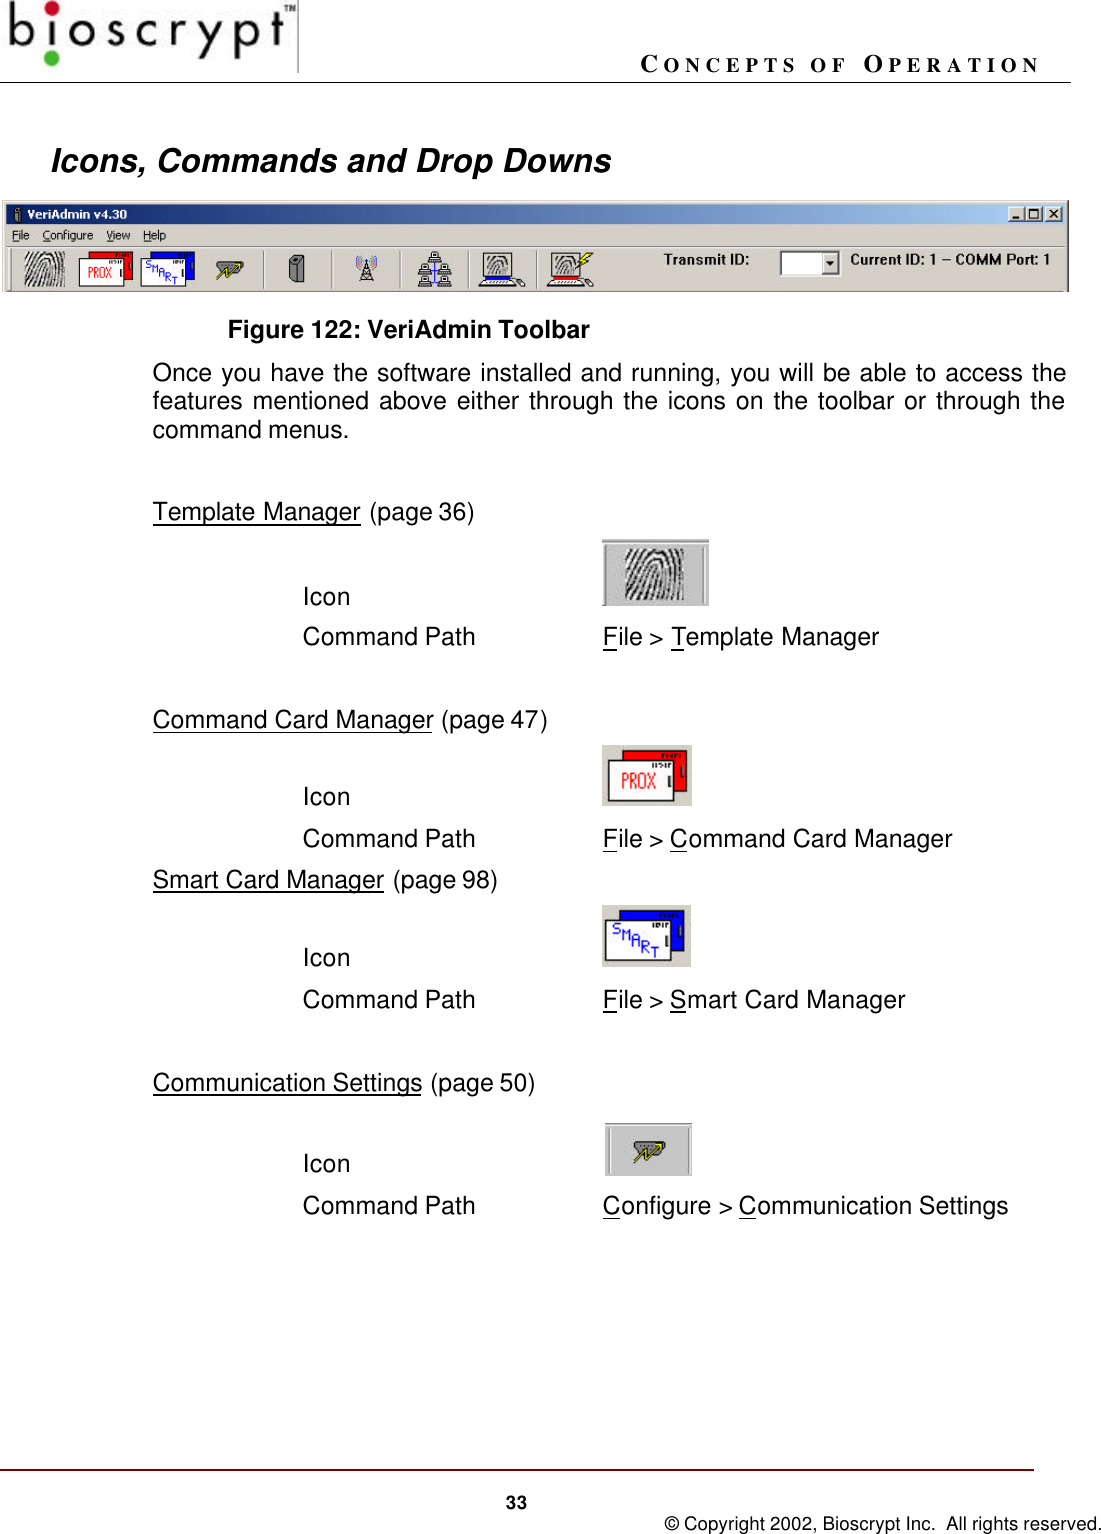 CONCEPTS OF OPERATION33 © Copyright 2002, Bioscrypt Inc.  All rights reserved.Icons, Commands and Drop DownsFigure 122: VeriAdmin ToolbarOnce you have the software installed and running, you will be able to access thefeatures mentioned above either through the icons on the toolbar or through thecommand menus.Template Manager (page 36)IconCommand Path File &gt; Template ManagerCommand Card Manager (page 47)IconCommand Path File &gt; Command Card ManagerSmart Card Manager (page 98)IconCommand Path File &gt; Smart Card ManagerCommunication Settings (page 50)IconCommand Path Configure &gt; Communication Settings